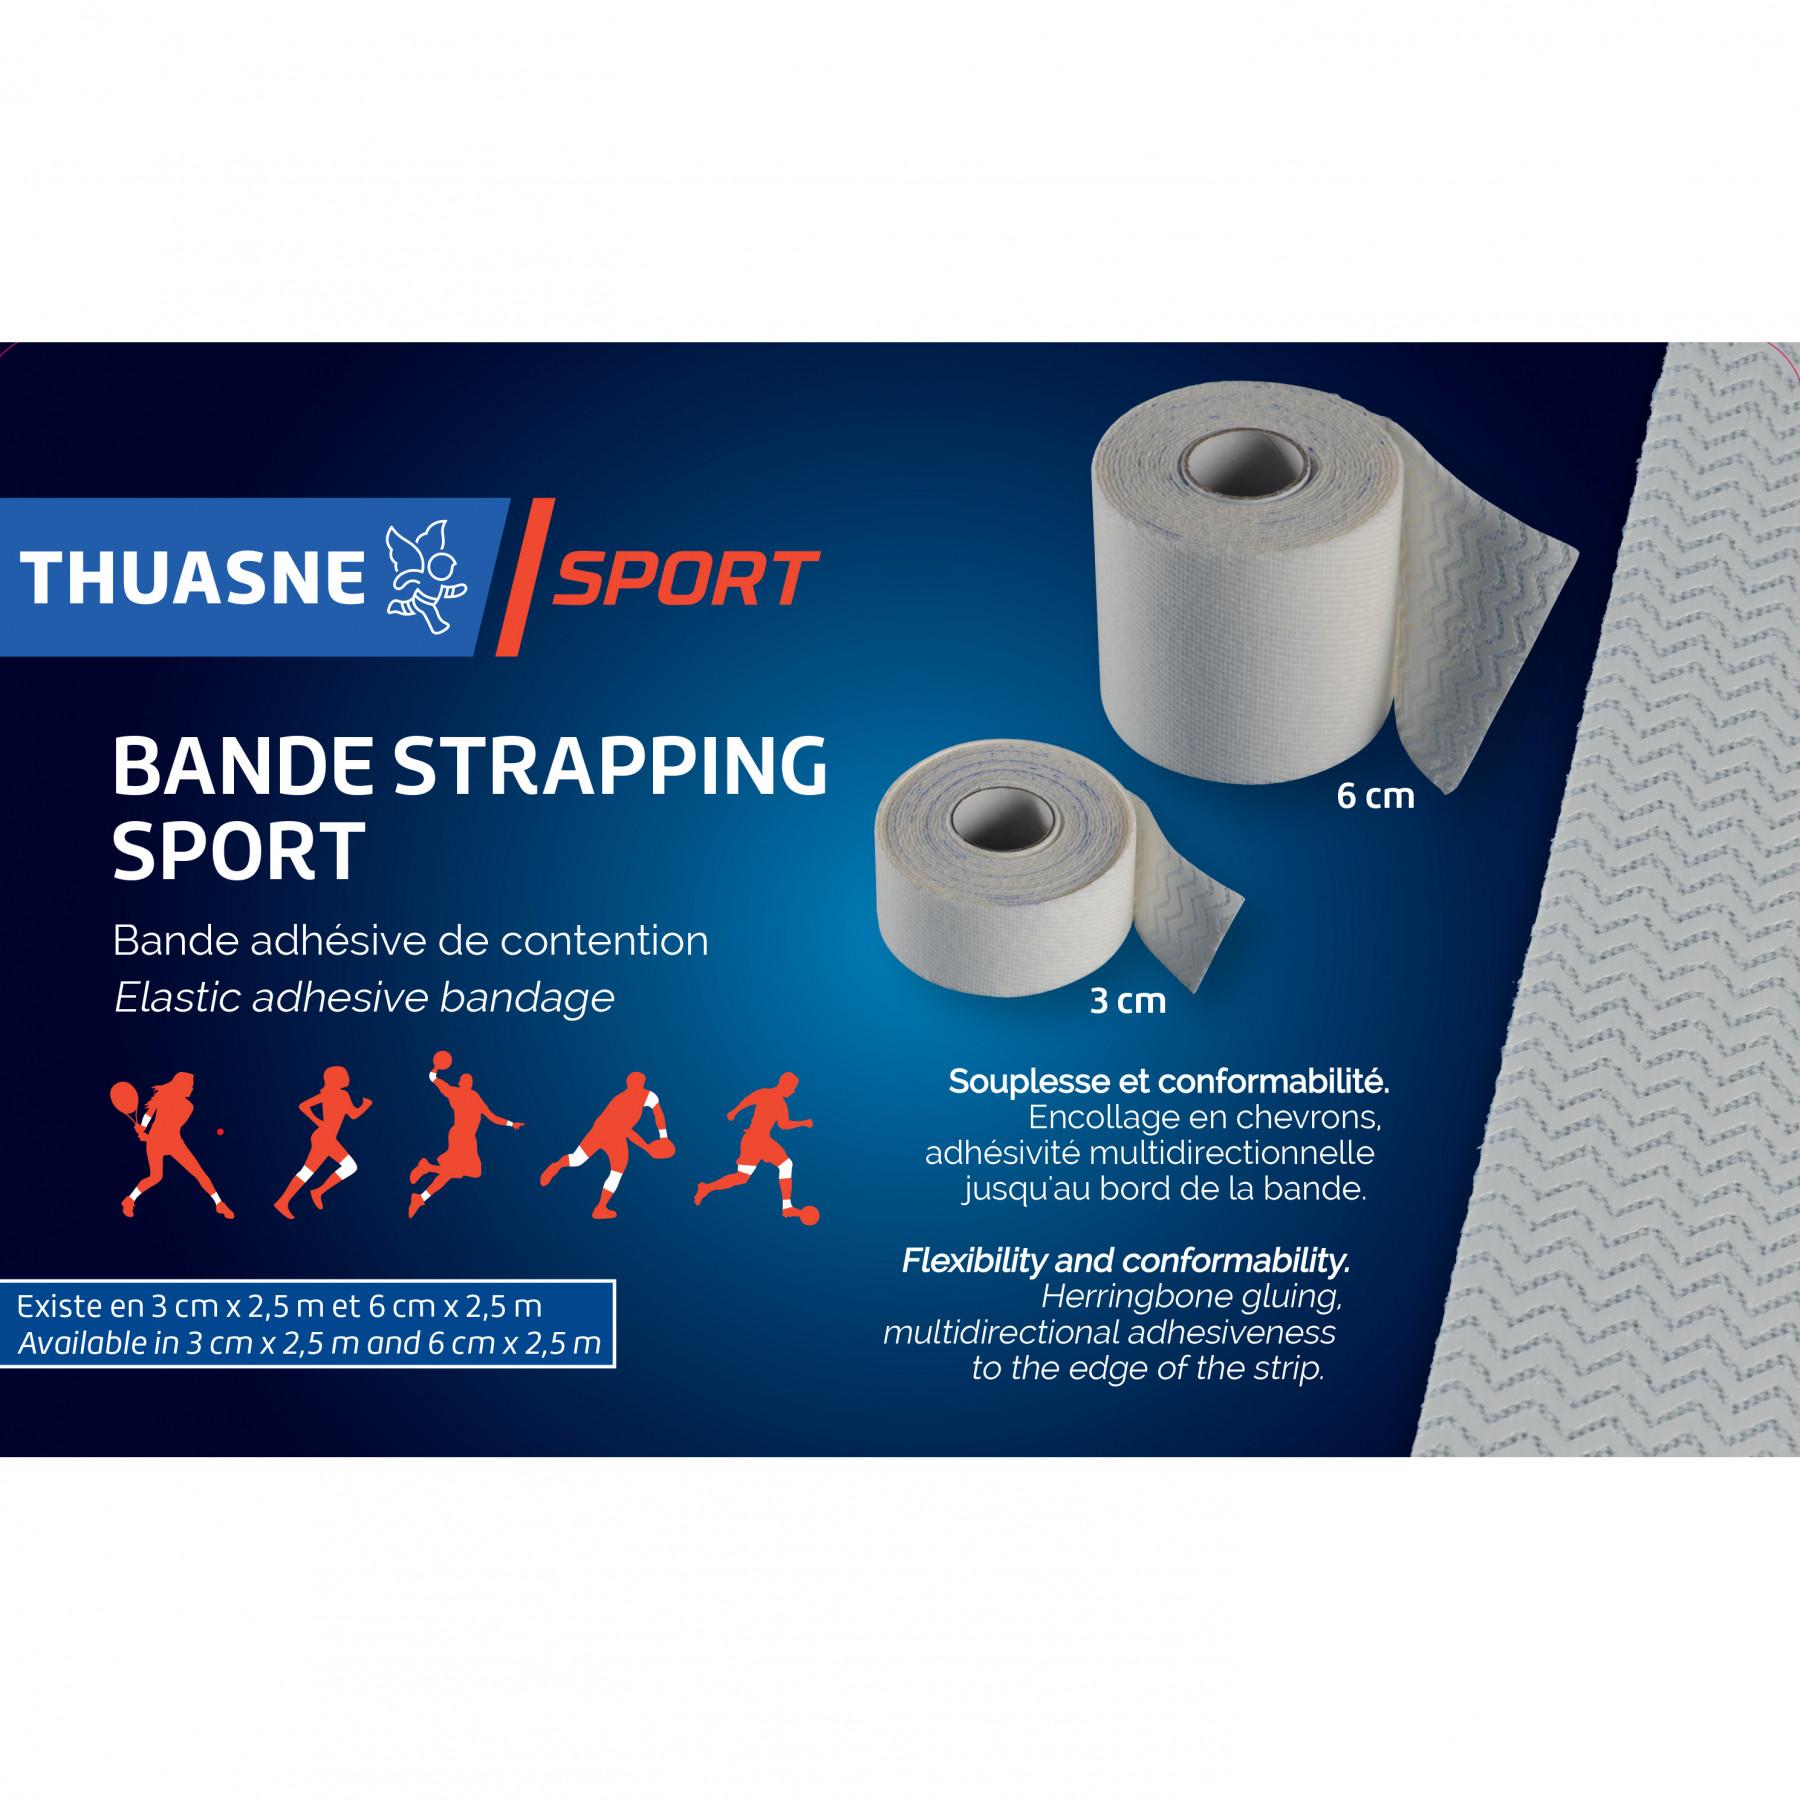 Bande strapping sport Thuasne 3CM